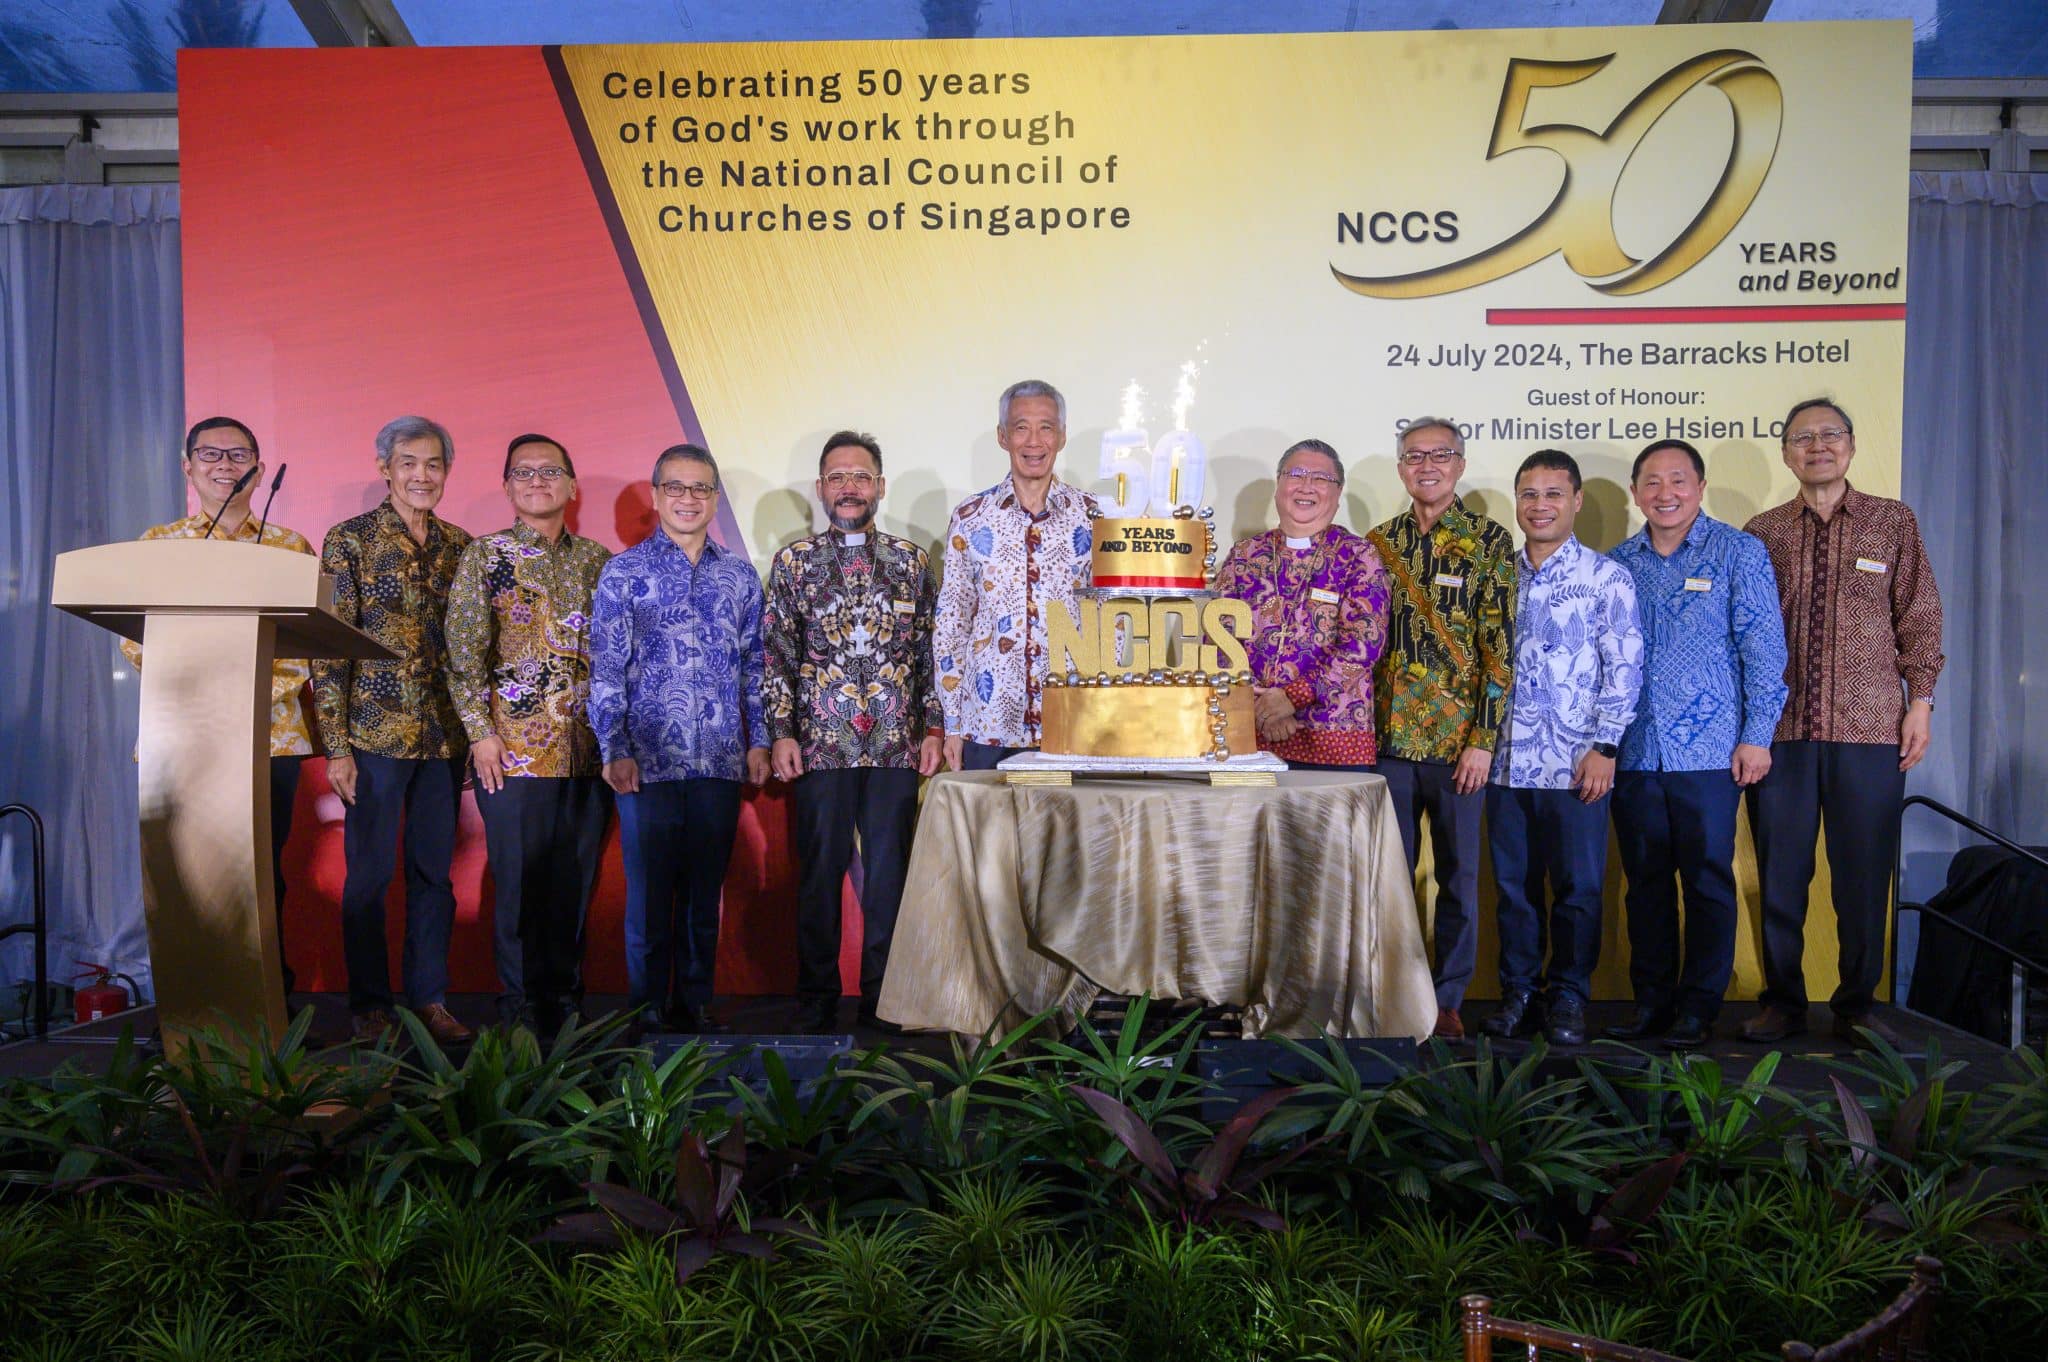 The National Council of Churches of Singapore (NCCS) has served the Church well in promoting unity and inter-religious harmony, as well as representing the Church on national leaders, said church leaders at NCCS' golden jubilee celebrations on July 24. All photos courtesy of NCCS.